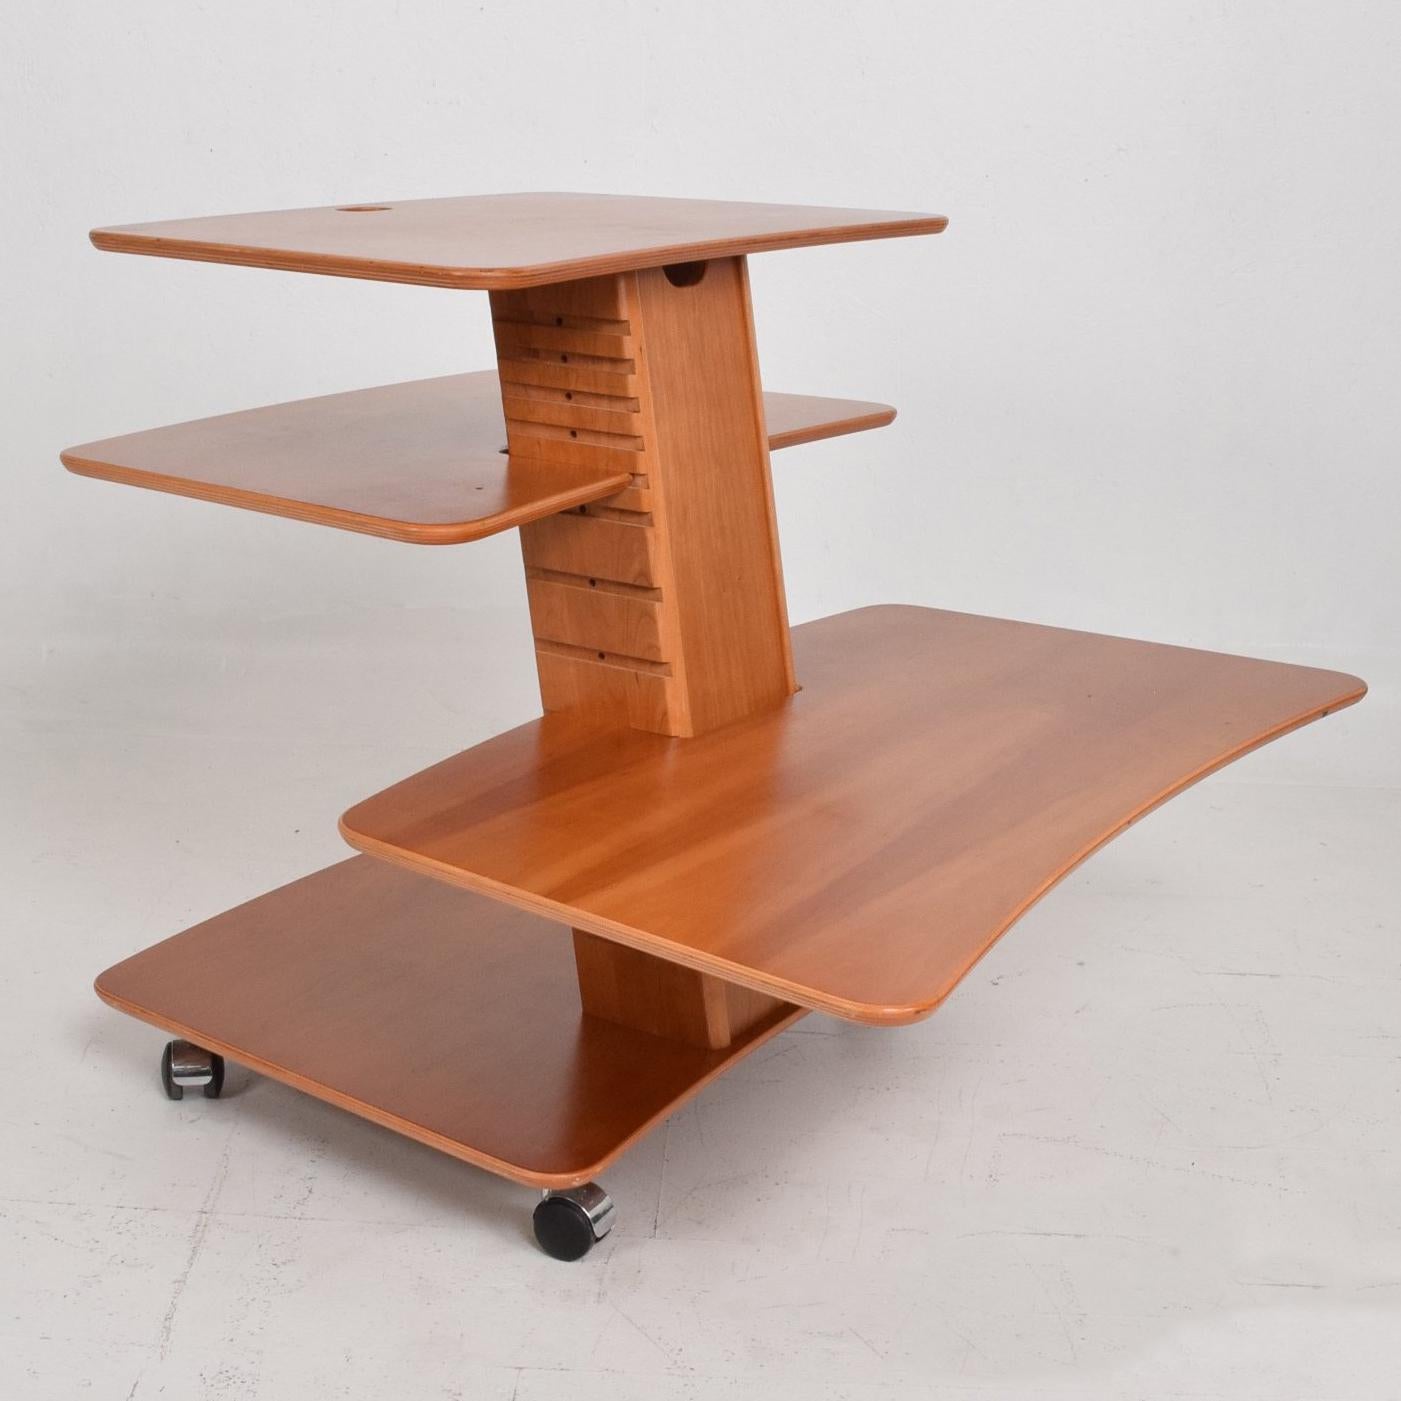 For your consideration a Danish modern adjustable stand/table with wheels. 
Stamped underneath with makers label 